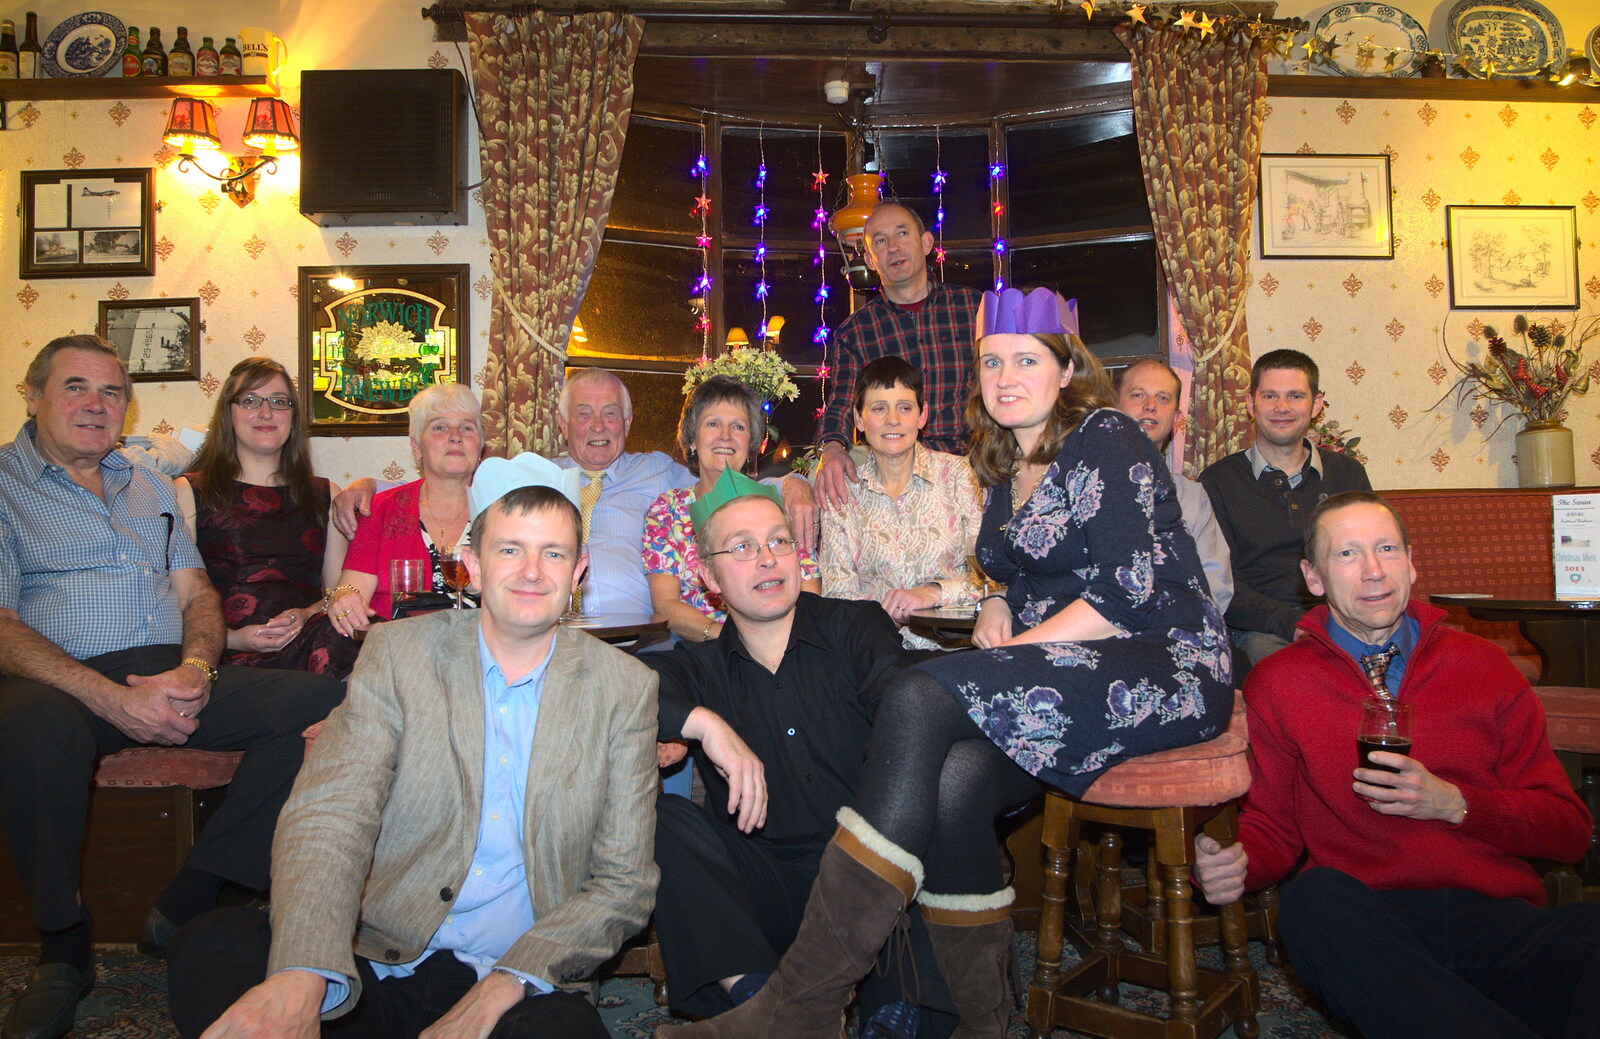 Nosher gets in on the group photo action from The BSCC Christmas Dinner, Brome, Suffolk - 7th December 2013